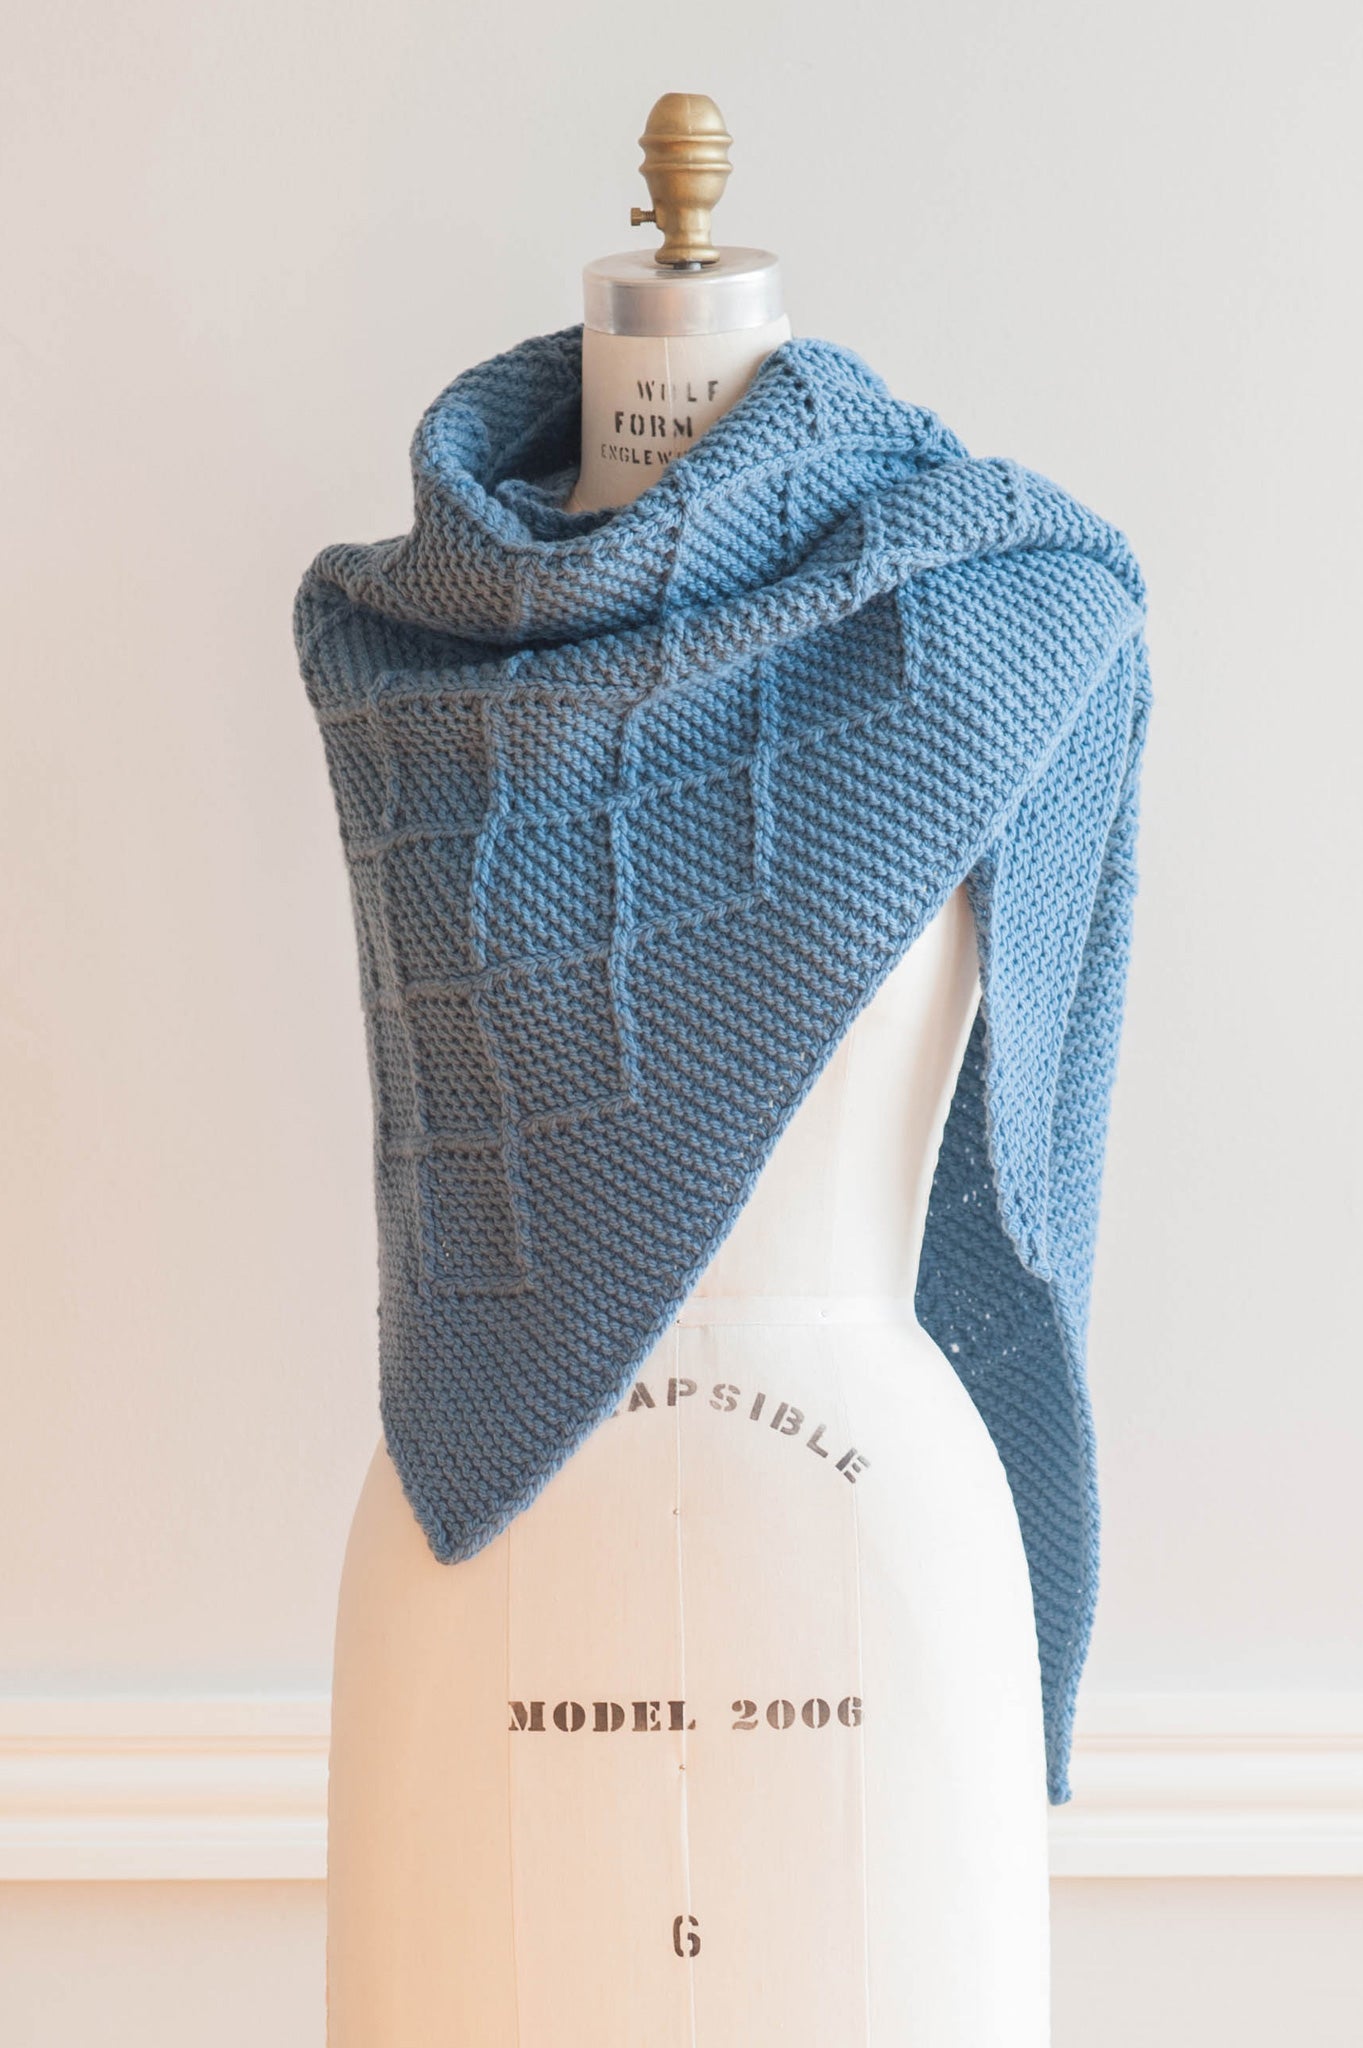 meander shawl knitting pattern – Quince & Co.